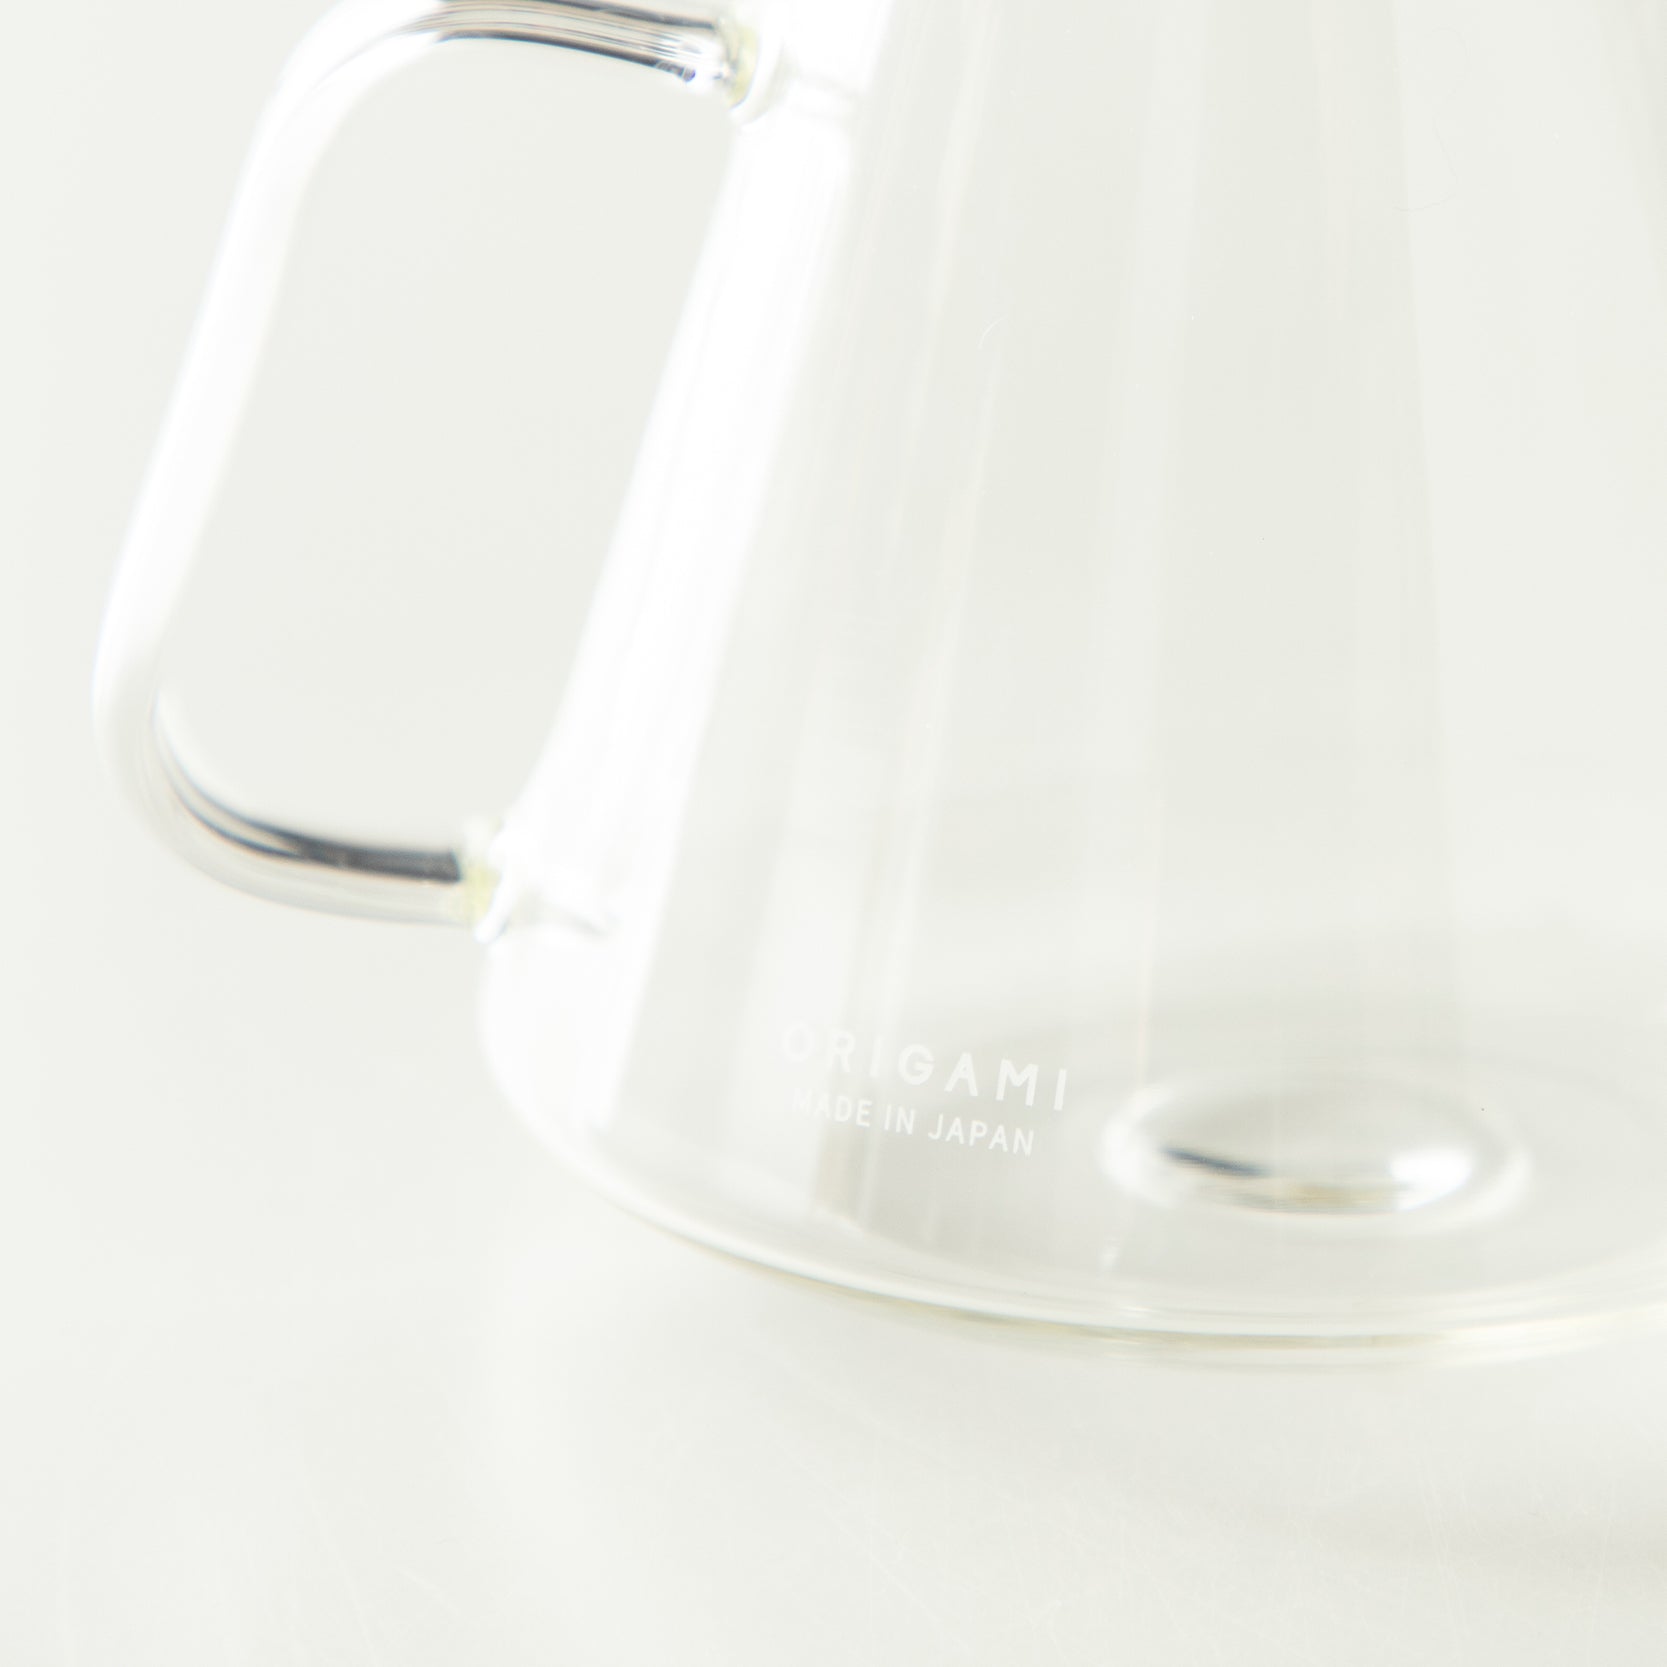 Glass Coffee Server with HARIO